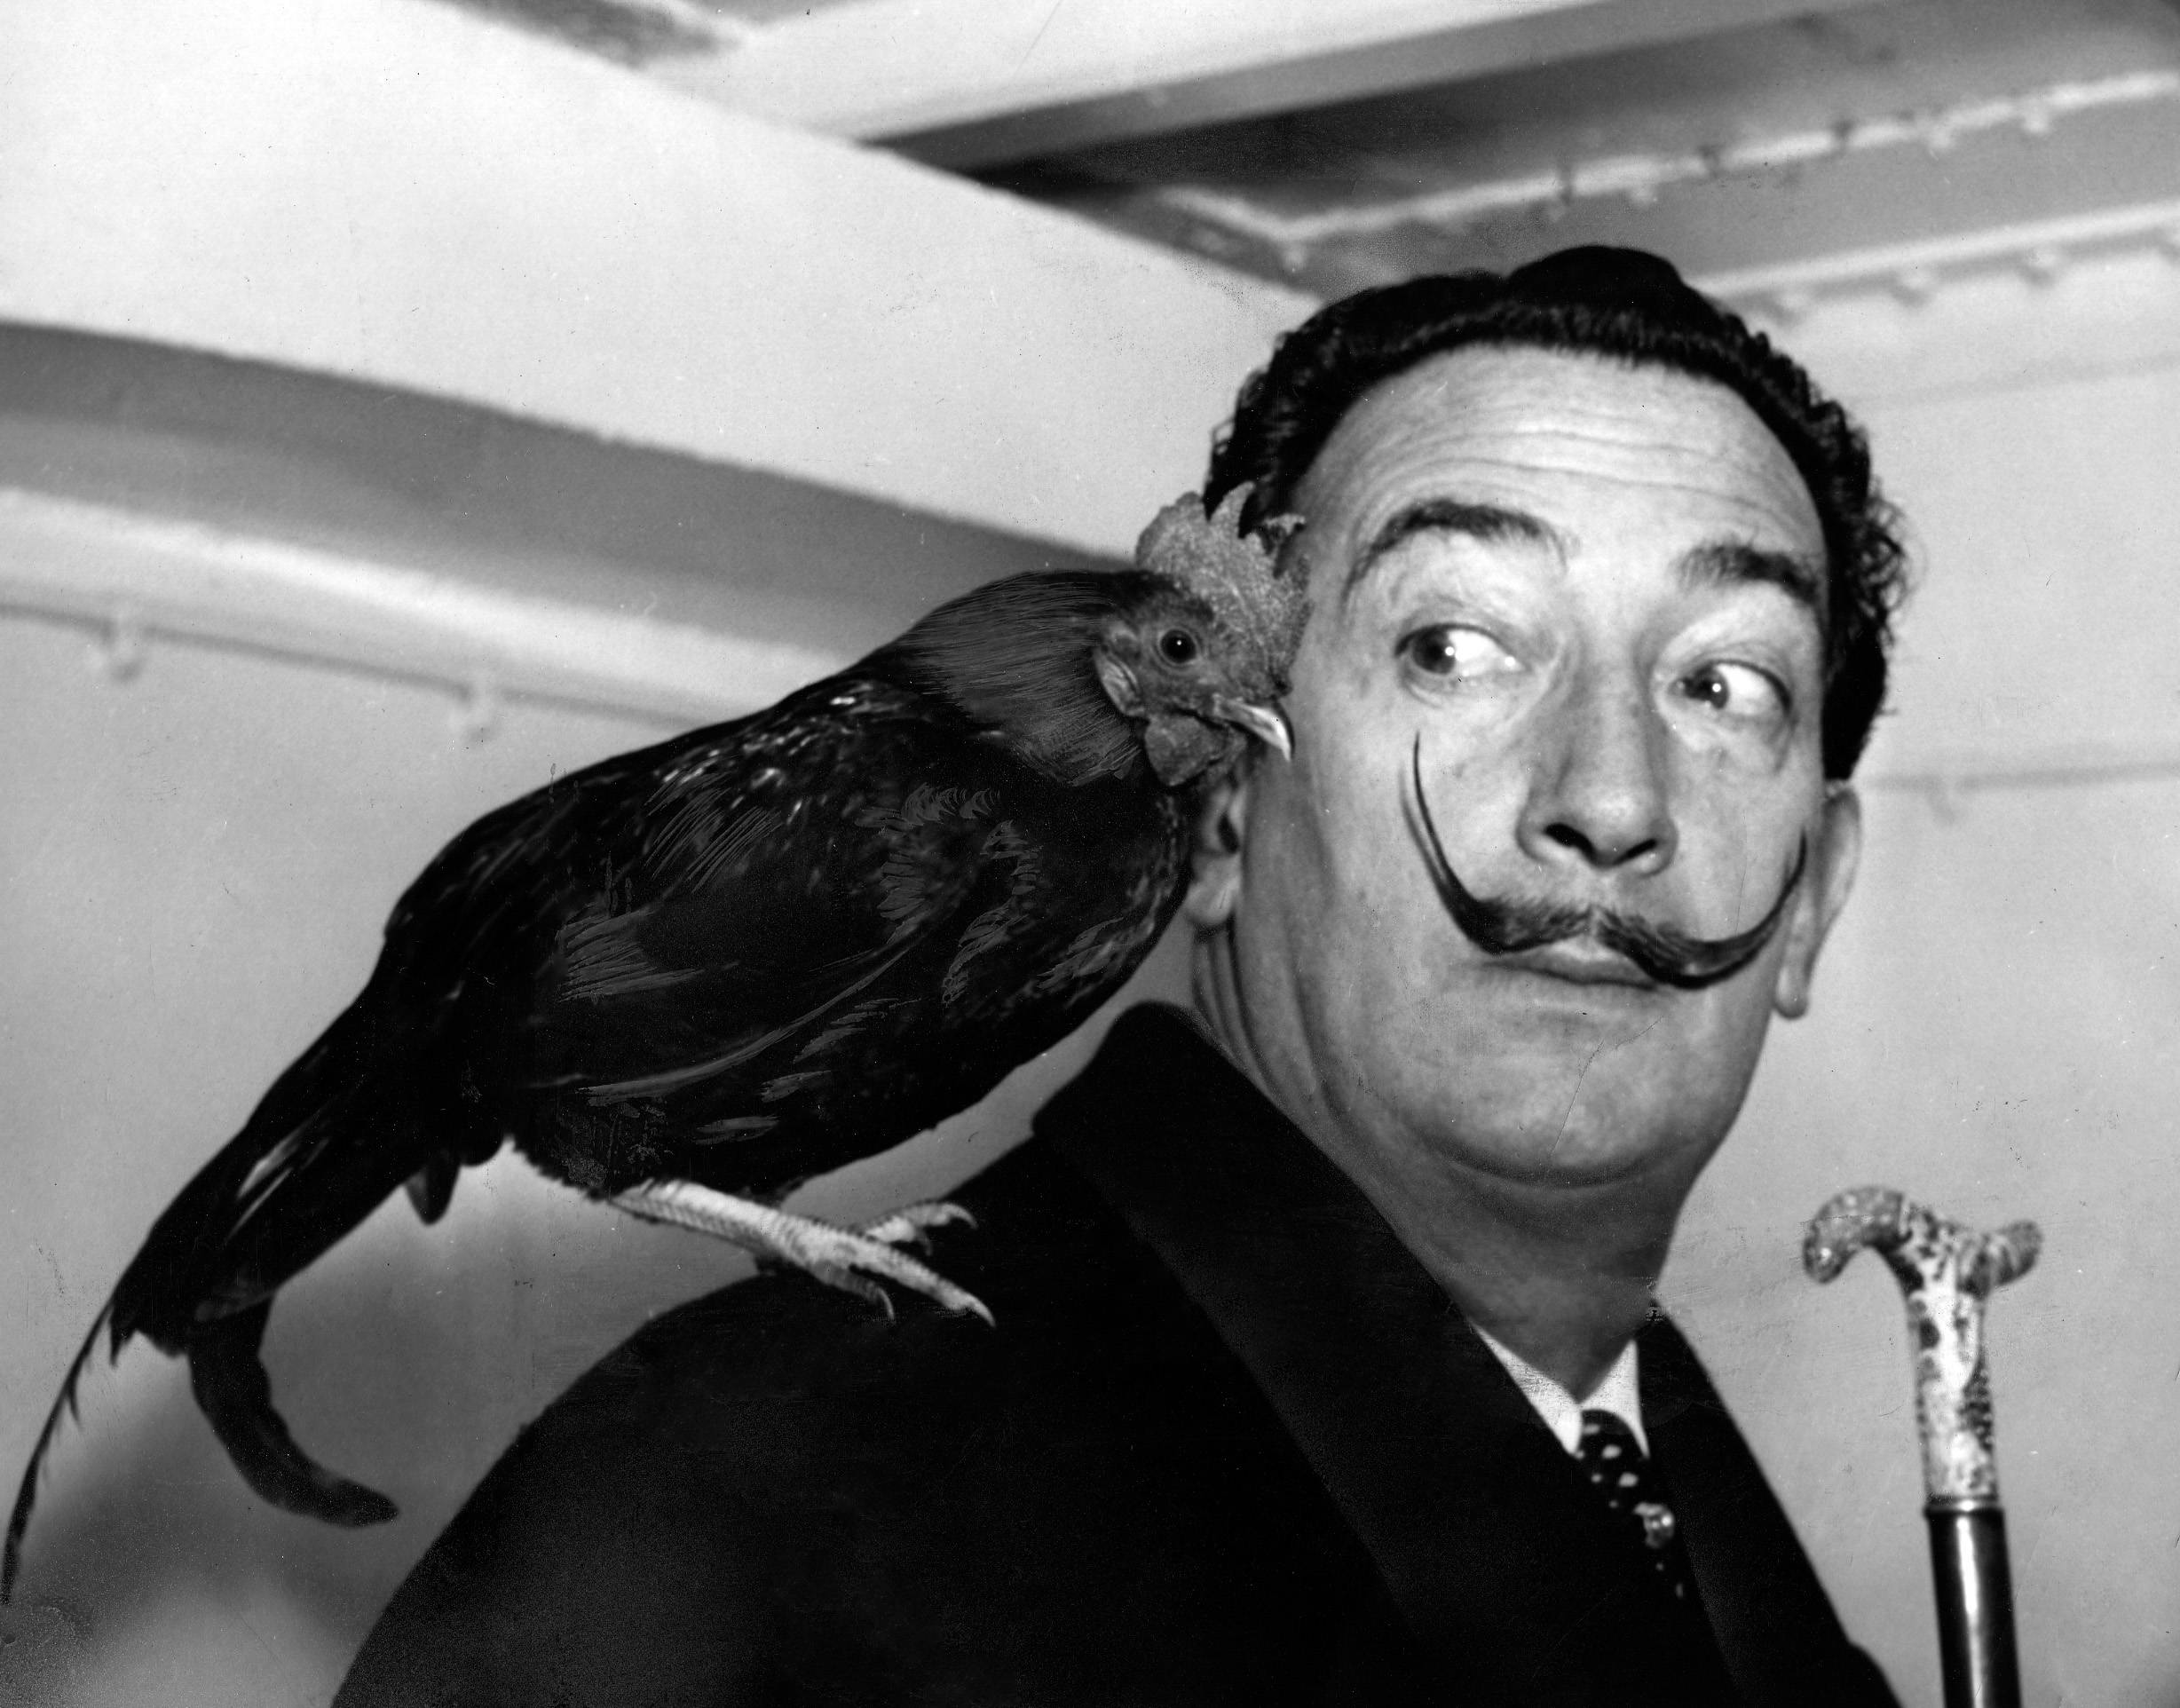 Two Salvador Dali paintings are stolen from Barcelona apartment in Spain